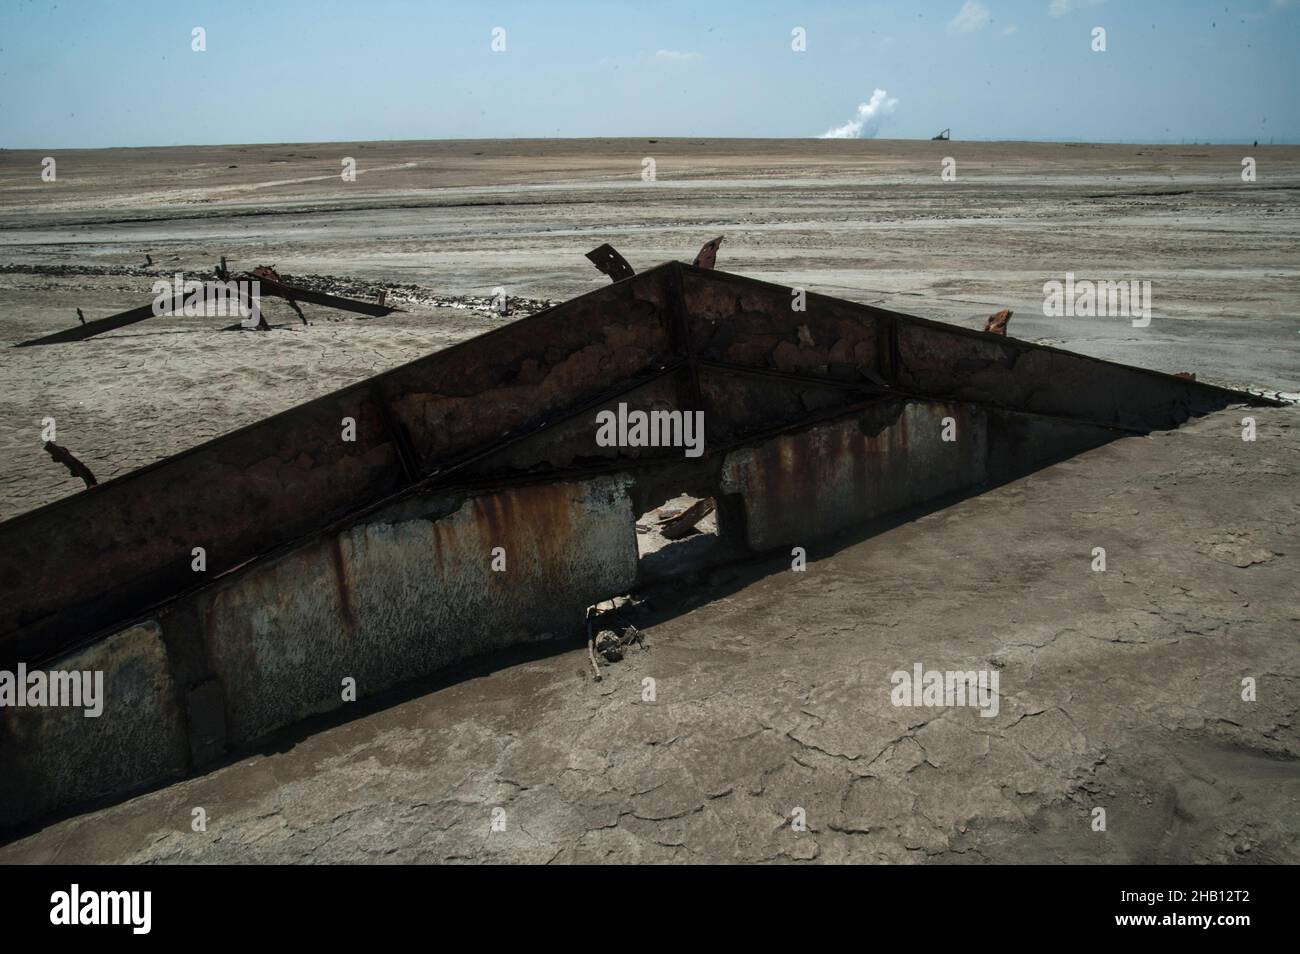 Photo dated October 19, 2016 - The debris home from the past settlement seen burried amid the Lapindo volcanic mudflow disaster area in Sidoarjo, East Java province, Indonesia. Since May 29, 2006 until now, as 1,143.3 hectares area land has changes be the natural territory of the world's largest mud volcano were belches water, oil, methane gas and mud everytime. The geological activity is a contributor to methane gas emissions amount as the largest natural gas manifestation on earth, based on the study report published in the journal Scientific Reports on February 18, 2021. Photo by Sutanta Ad Stock Photo